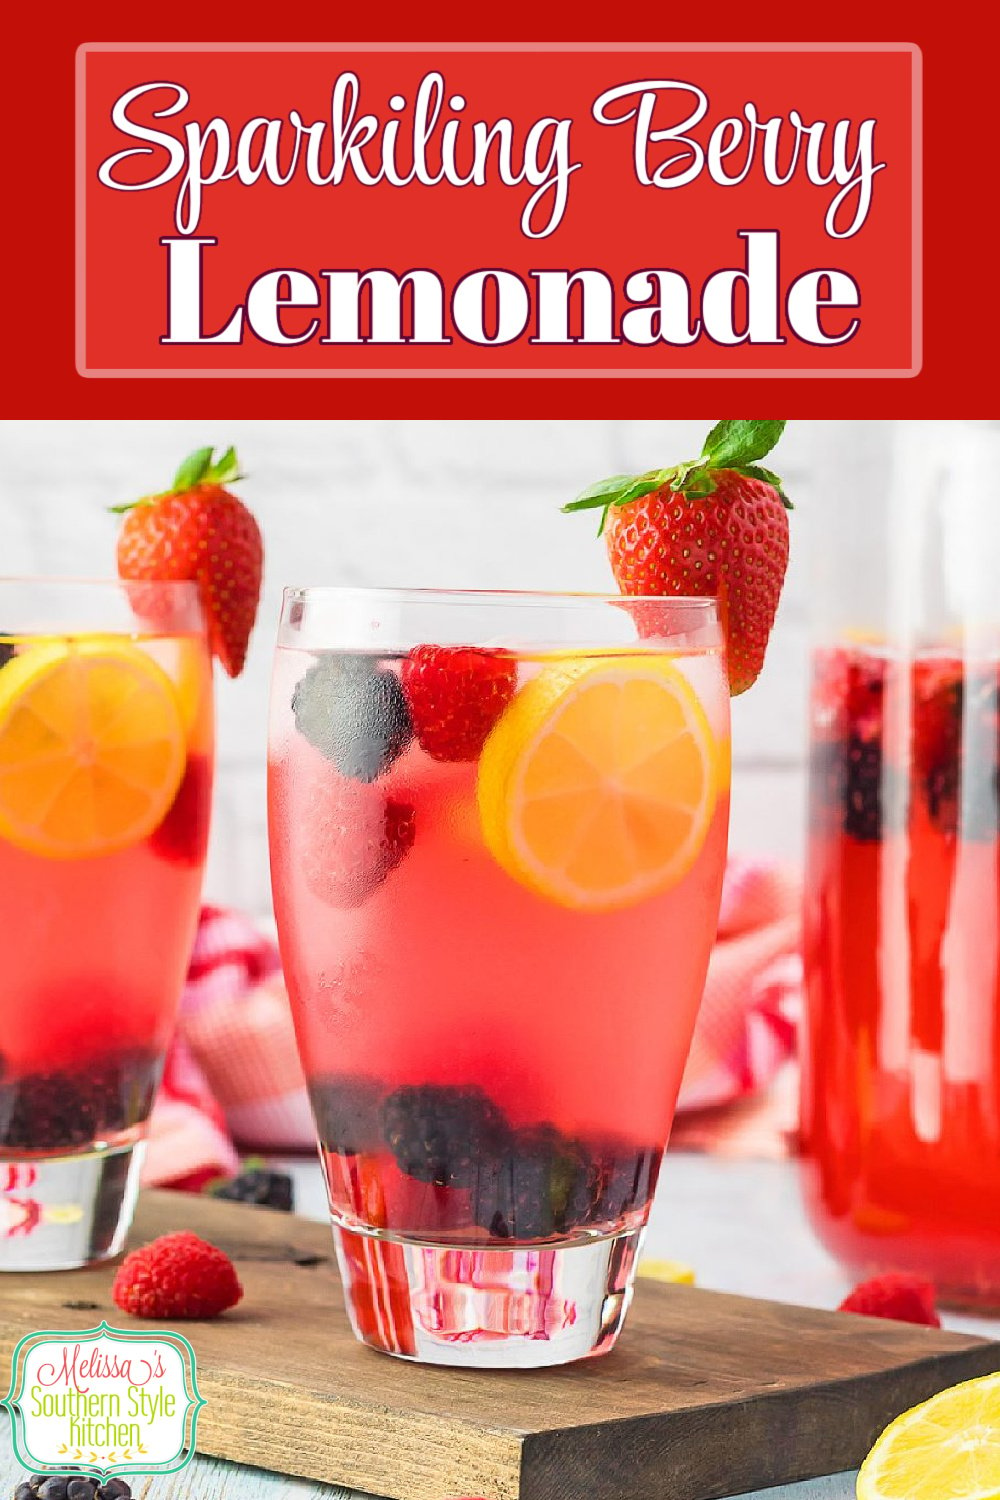 Cool down in style on a hot day with a tall glass of  chilled Sparkling Berry Lemonade garnished with berries or a sprig of mint. #lemonade #sparklinglemonade #berrylemonade #lemonaderecipes #strawberrylemonade #nonalcoholicdrinks #familyfriendlydrinks #southernrecipes via @melissasssk